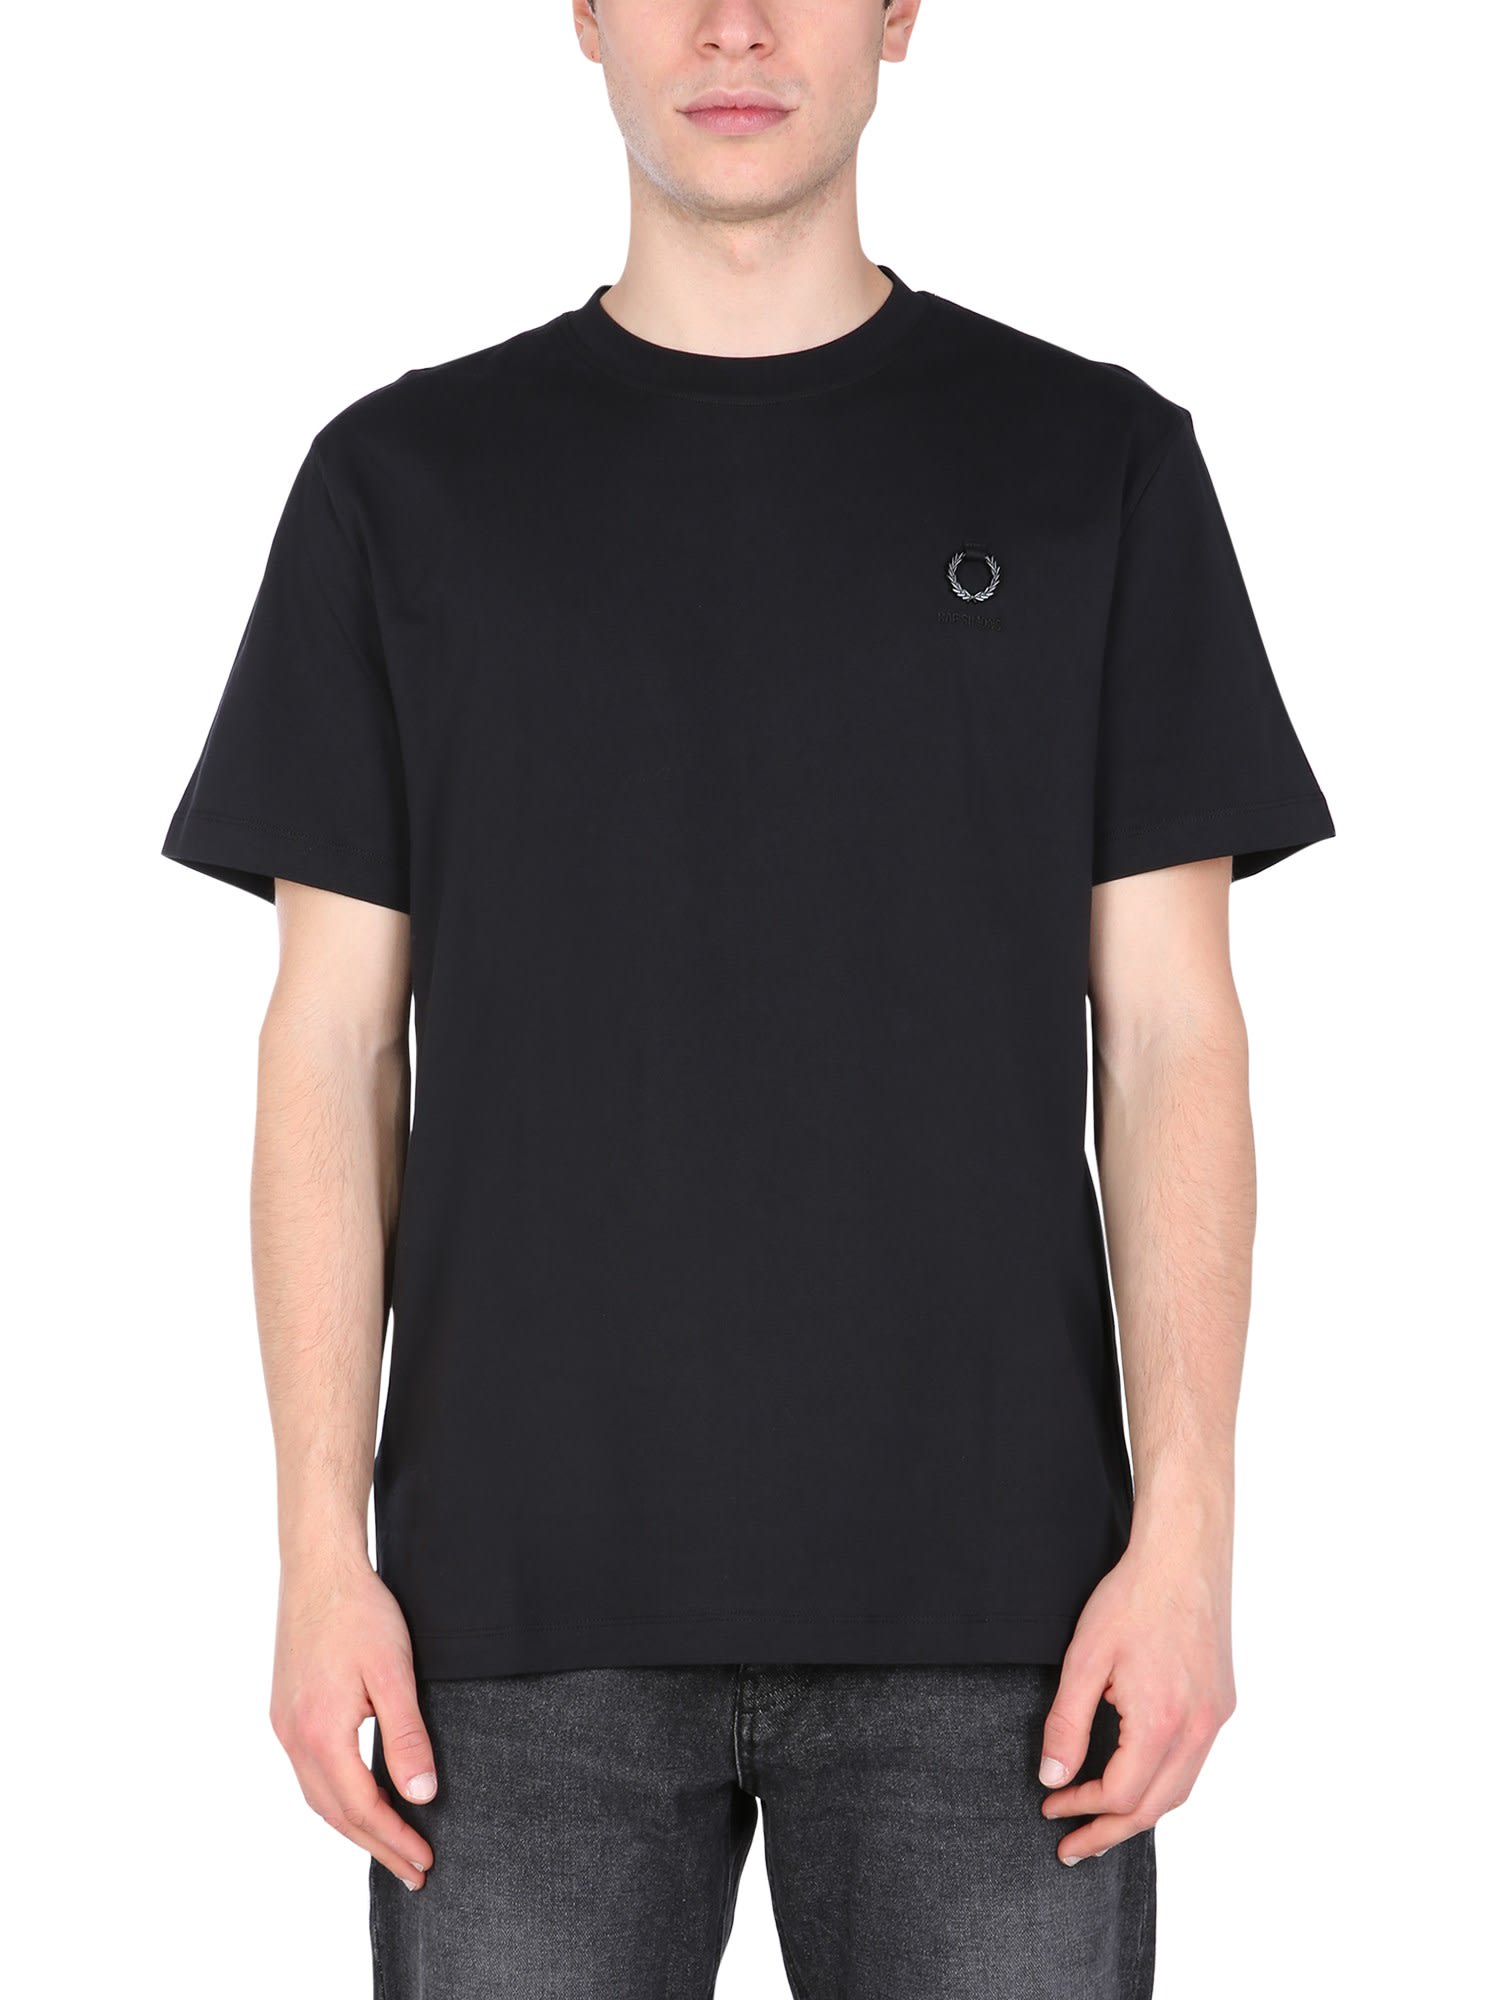 Fred Perry by Raf Simons Crew Neck T-shirt